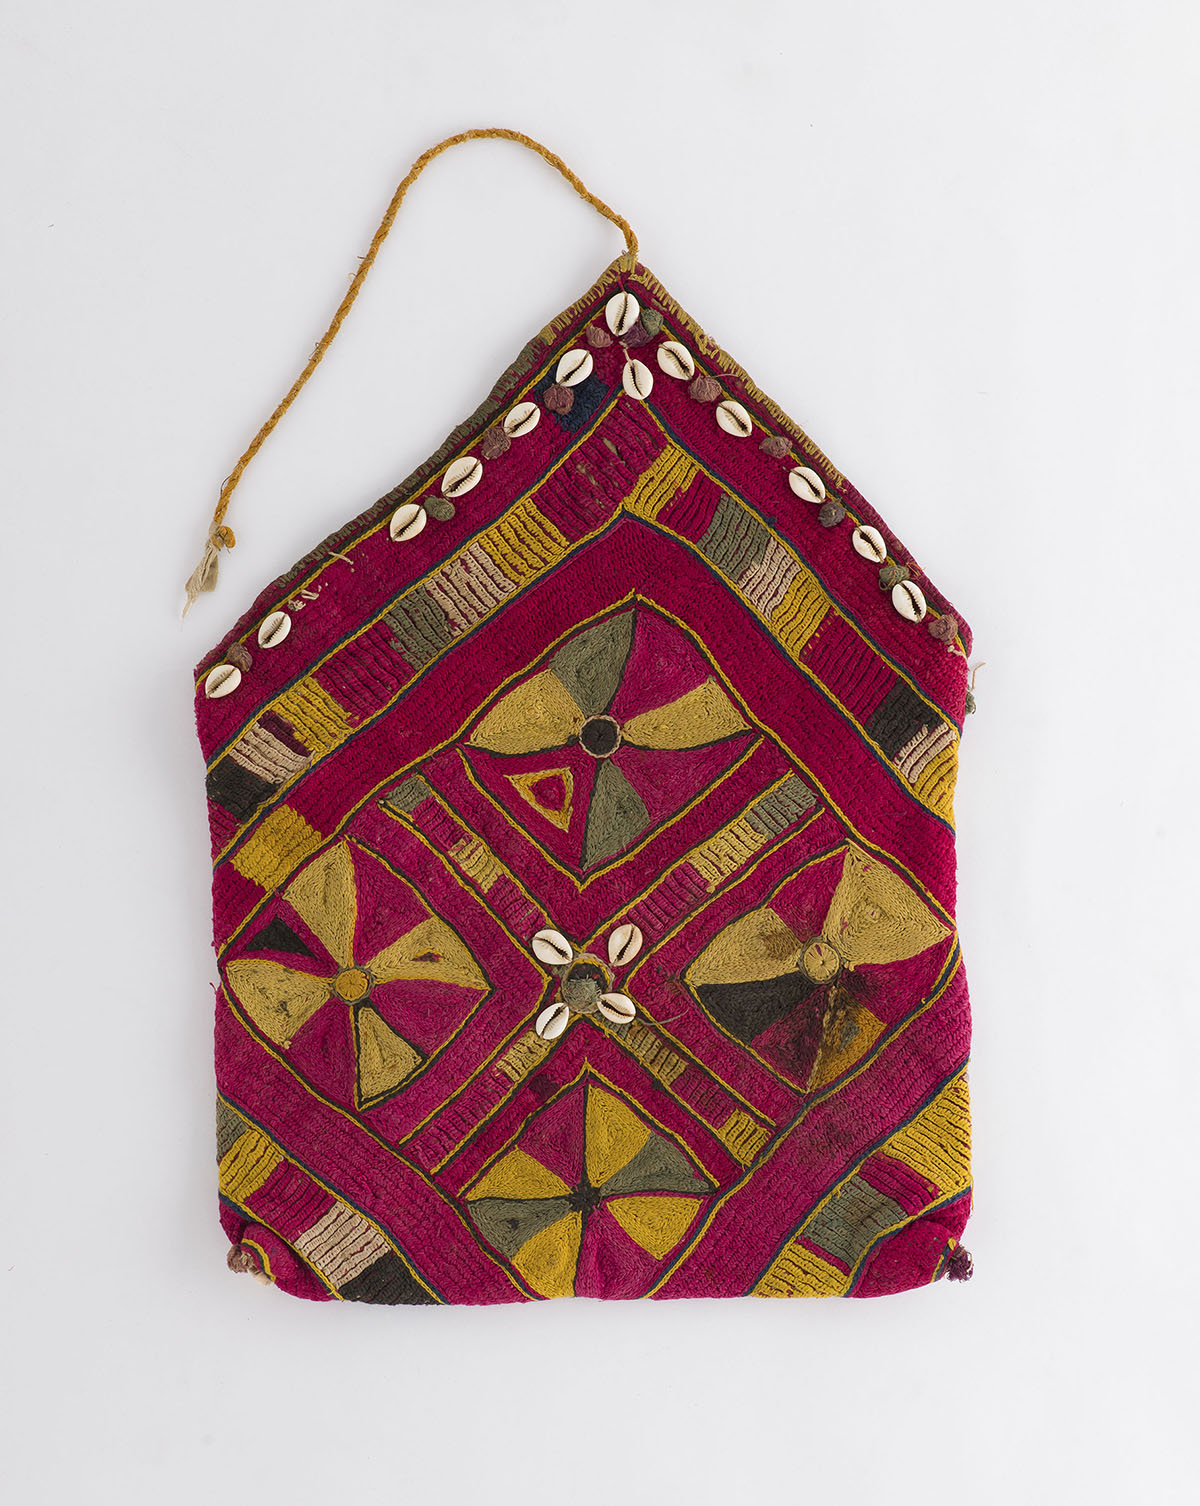 A vividly coloured handwoven bag, with Banjara embroidery and cowry shells decorating its upper edge.